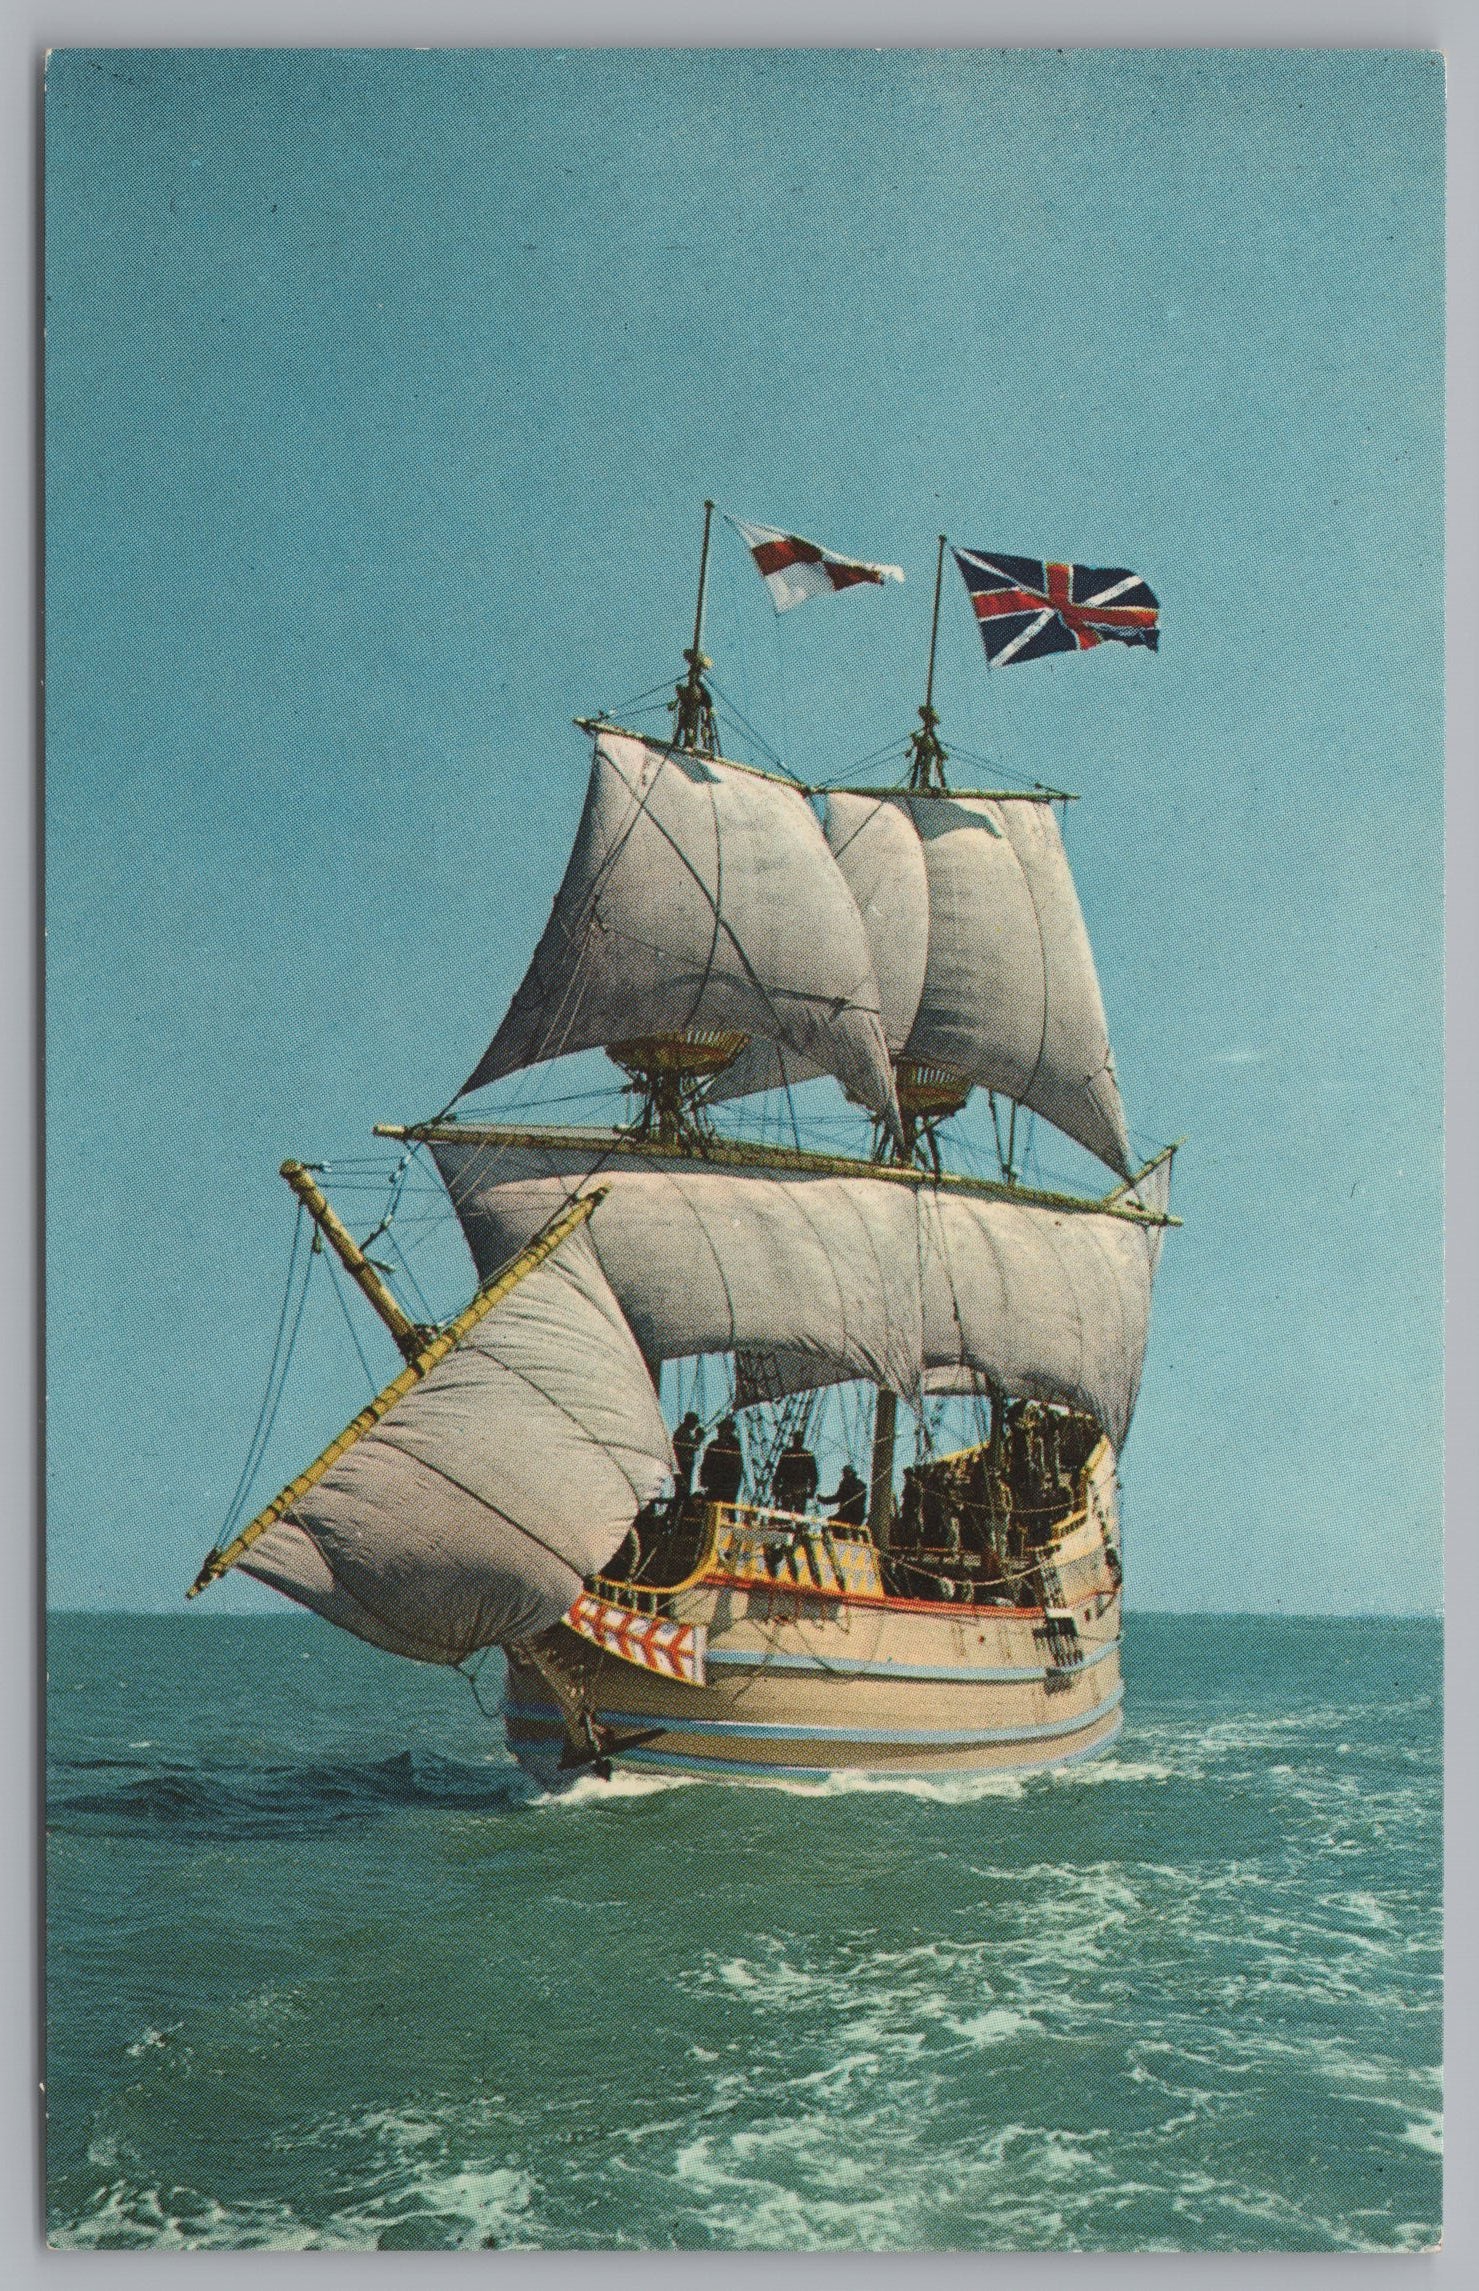 The Susan Constant, Full Sail In Chesapeake Bay, Vintage Post Card.